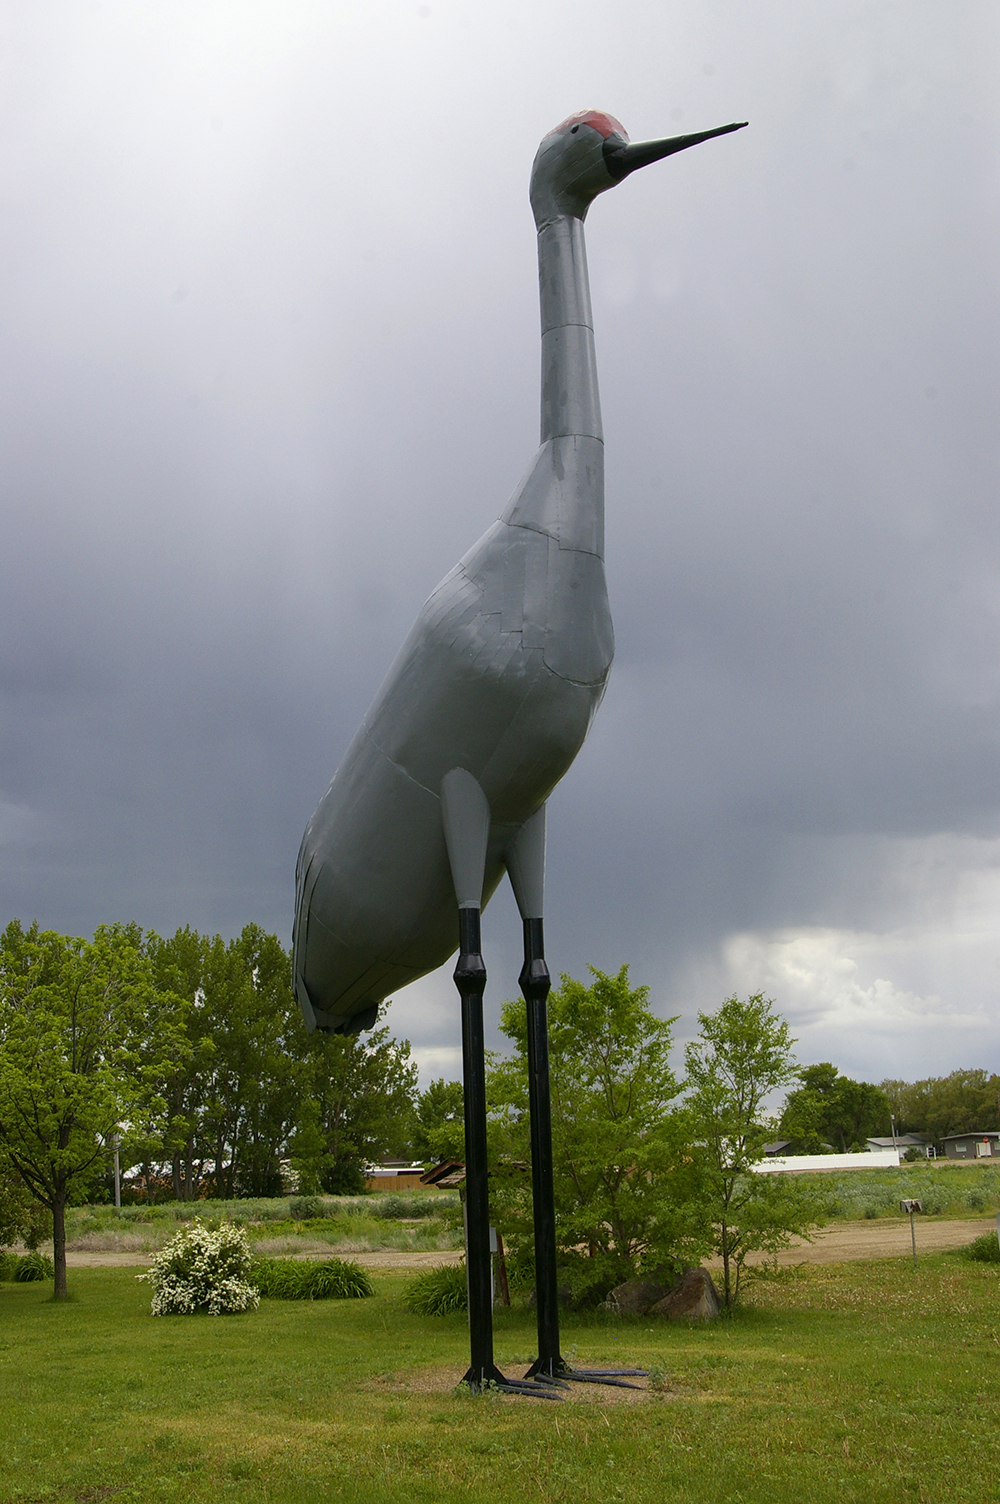 Giant gray crane statue with a red head and black legs named Sandy, the world's largest Sandhill Crane, in Steele, North Dakota,